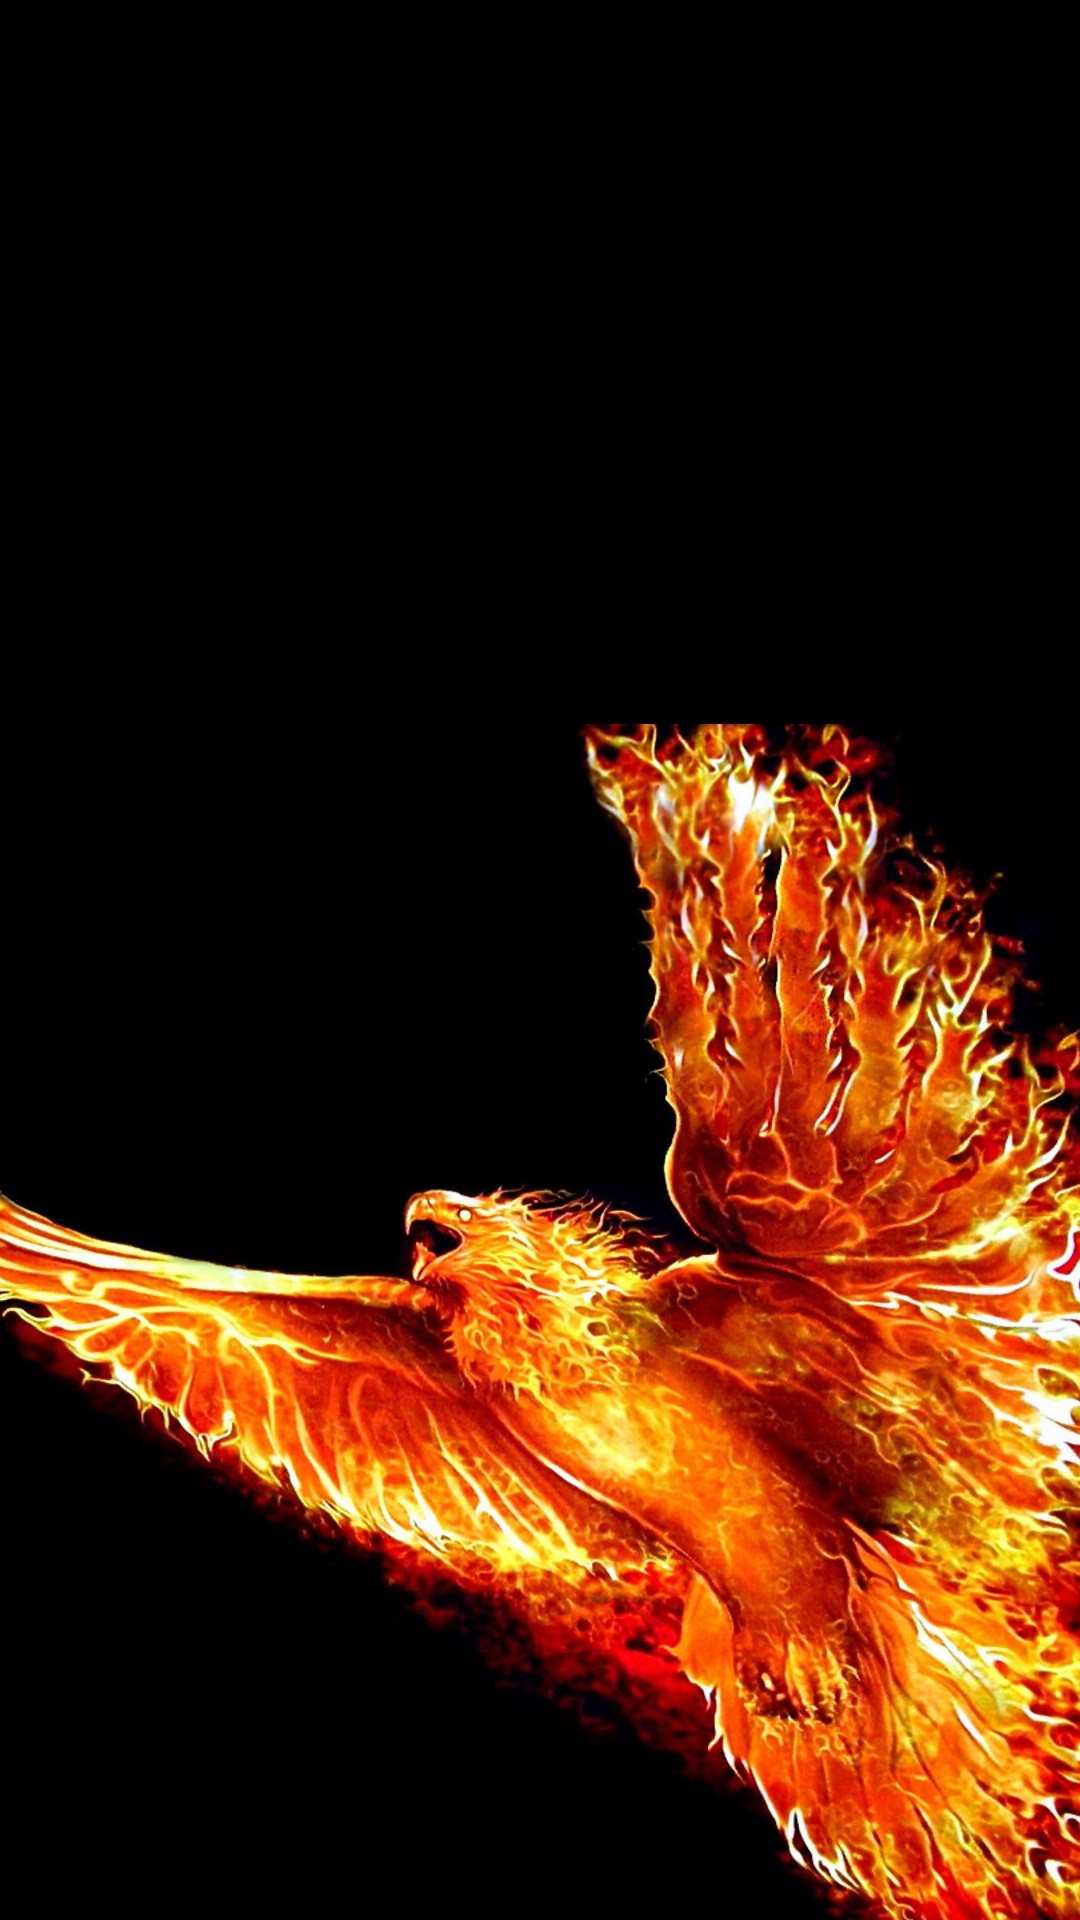 iPhone Wallpaper Phoenix Bird with resolution 1080X1920 pixel. You can make this wallpaper for your iPhone 5, 6, 7, 8, X backgrounds, Mobile Screensaver, or iPad Lock Screen